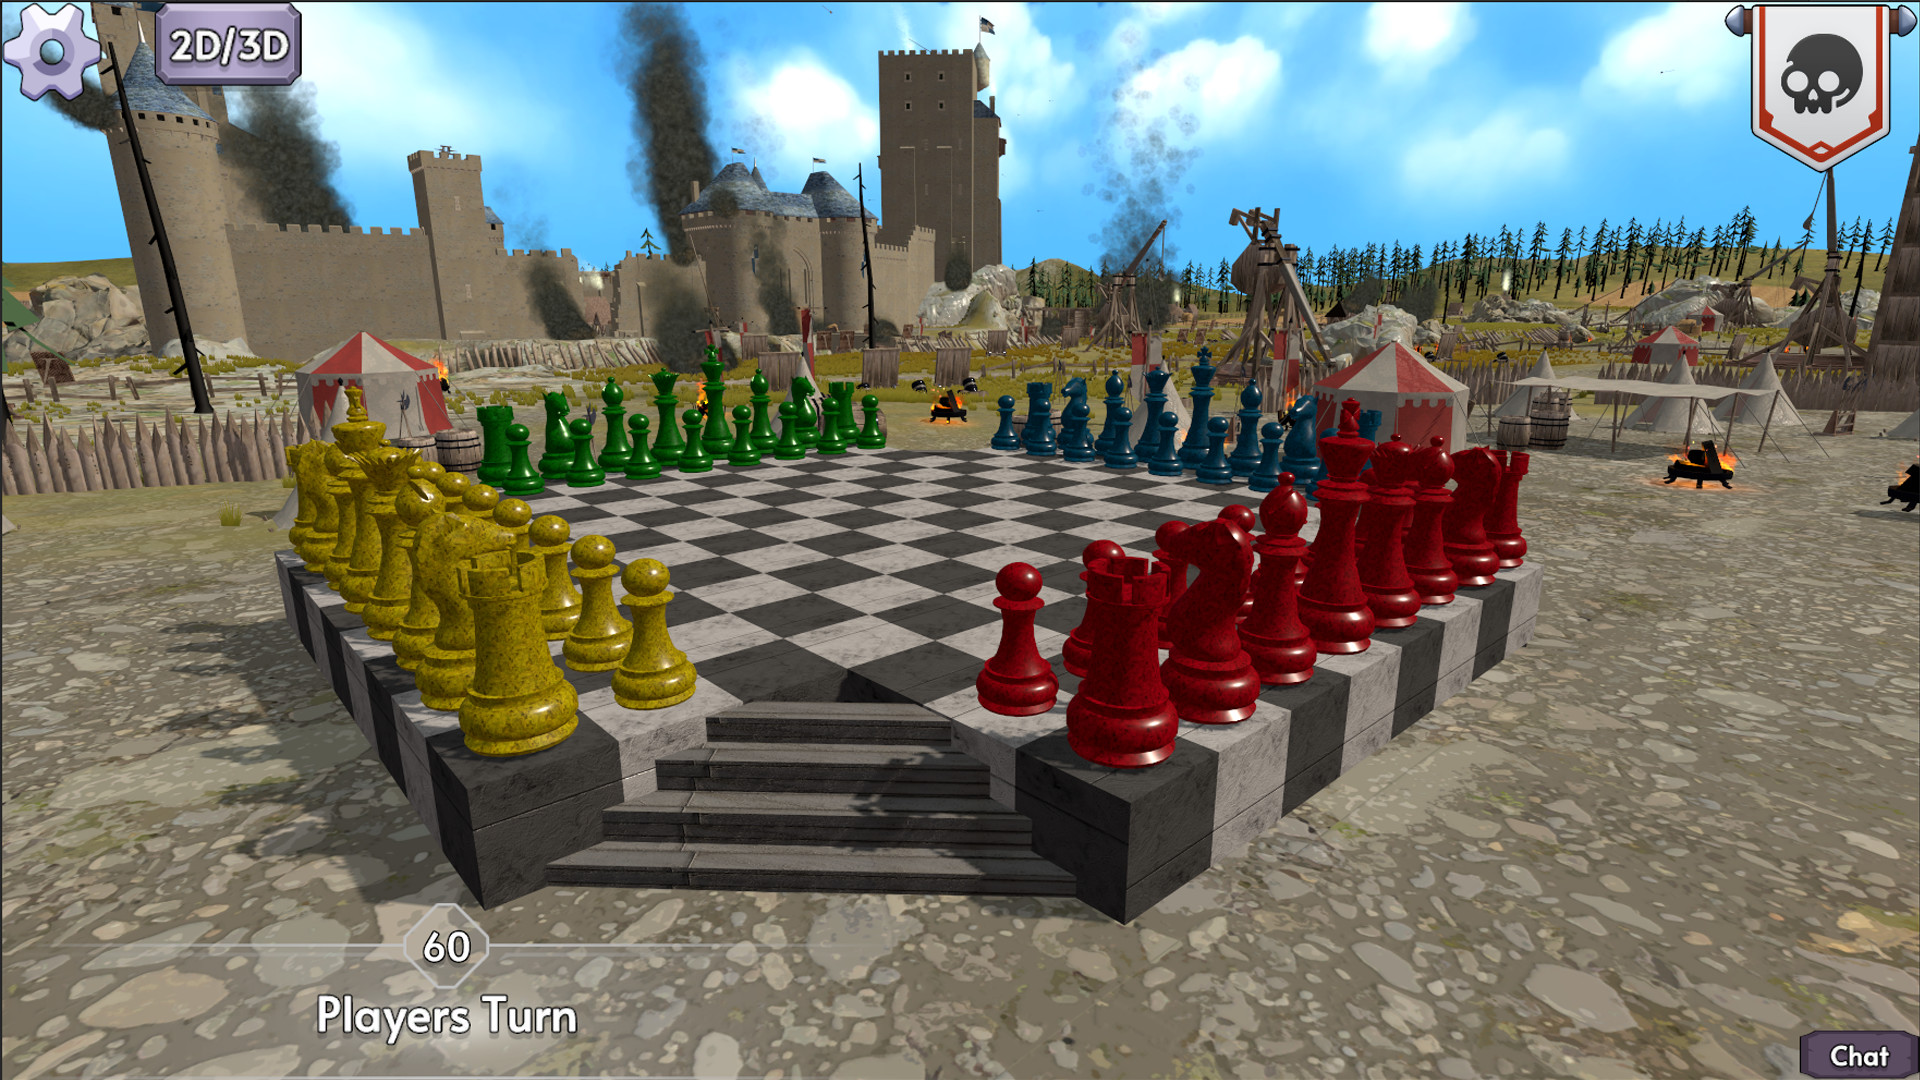 Cooperative Chess on Steam